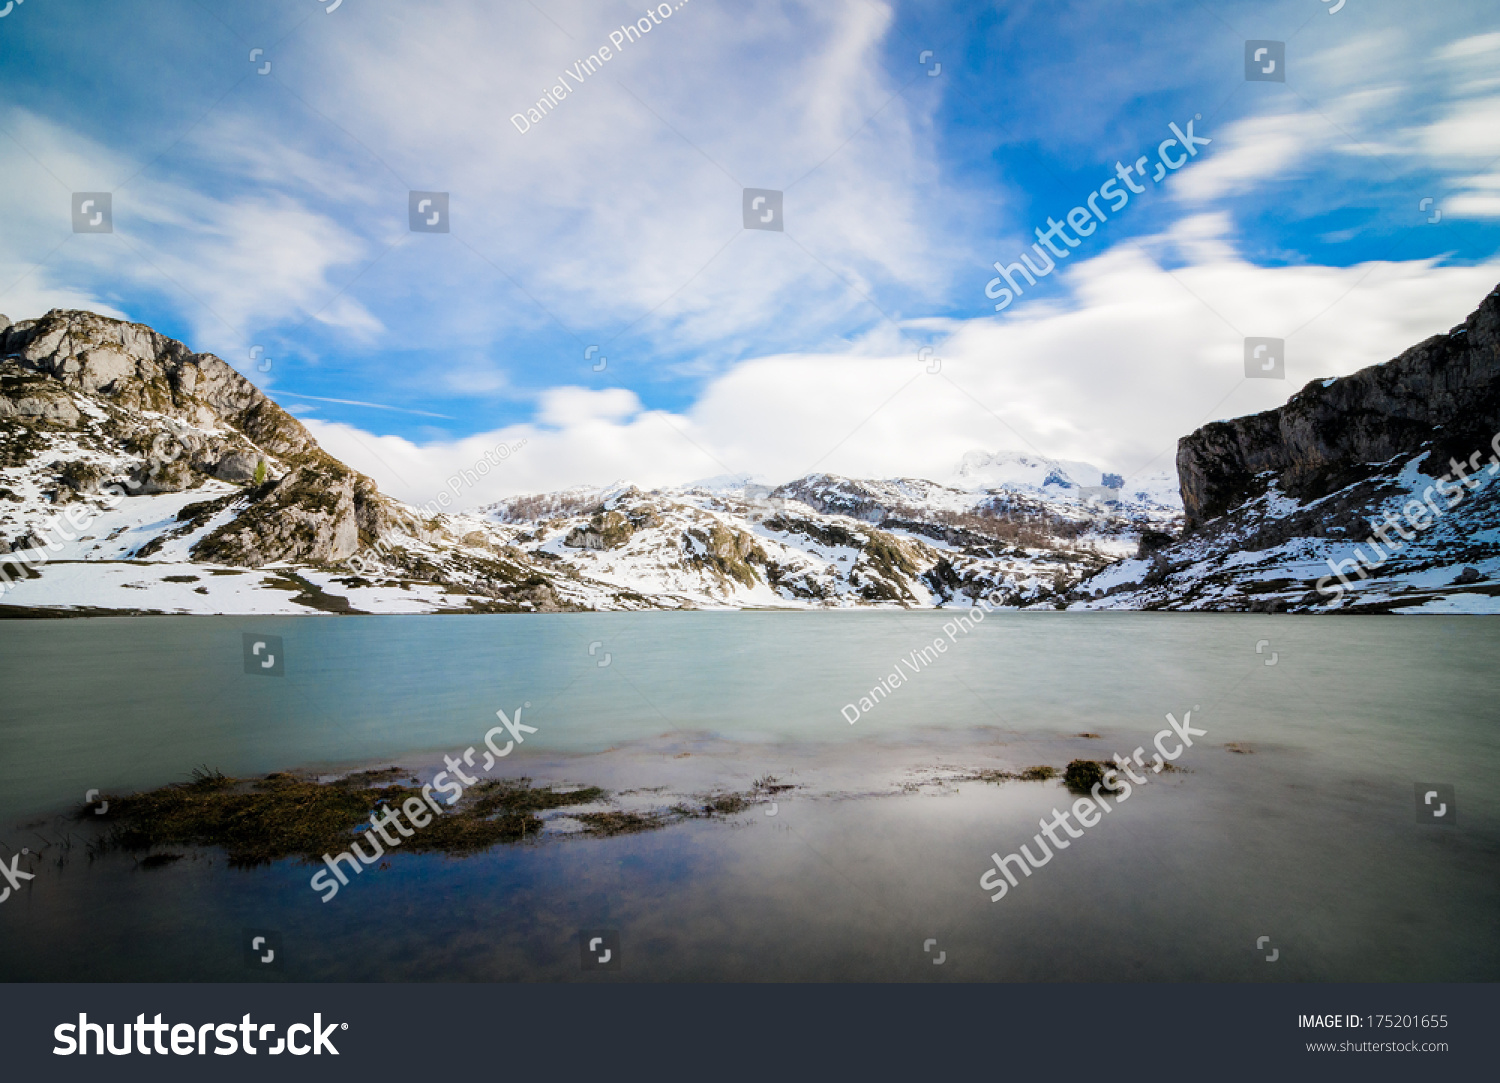 Lake Ercina, one of the famous lakes of Covadonga #175201655